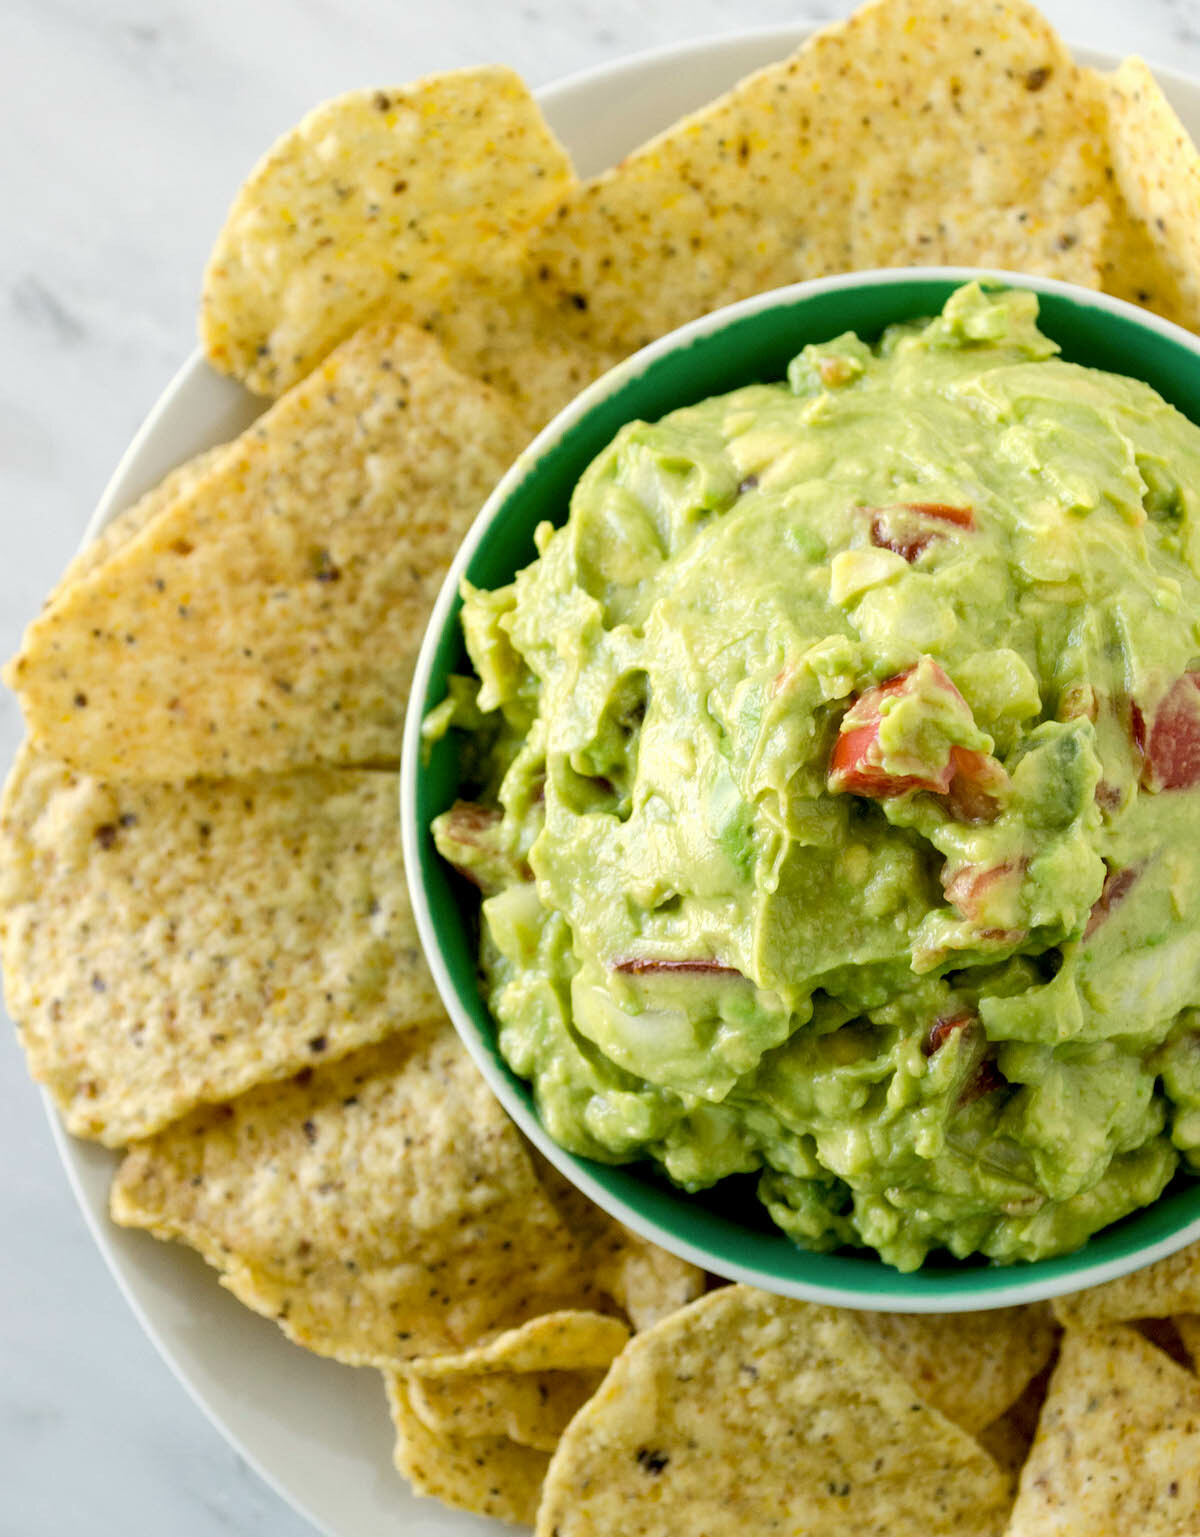 Guacamole ©cookingalamel Licence CC BY-NC-ND 2.0